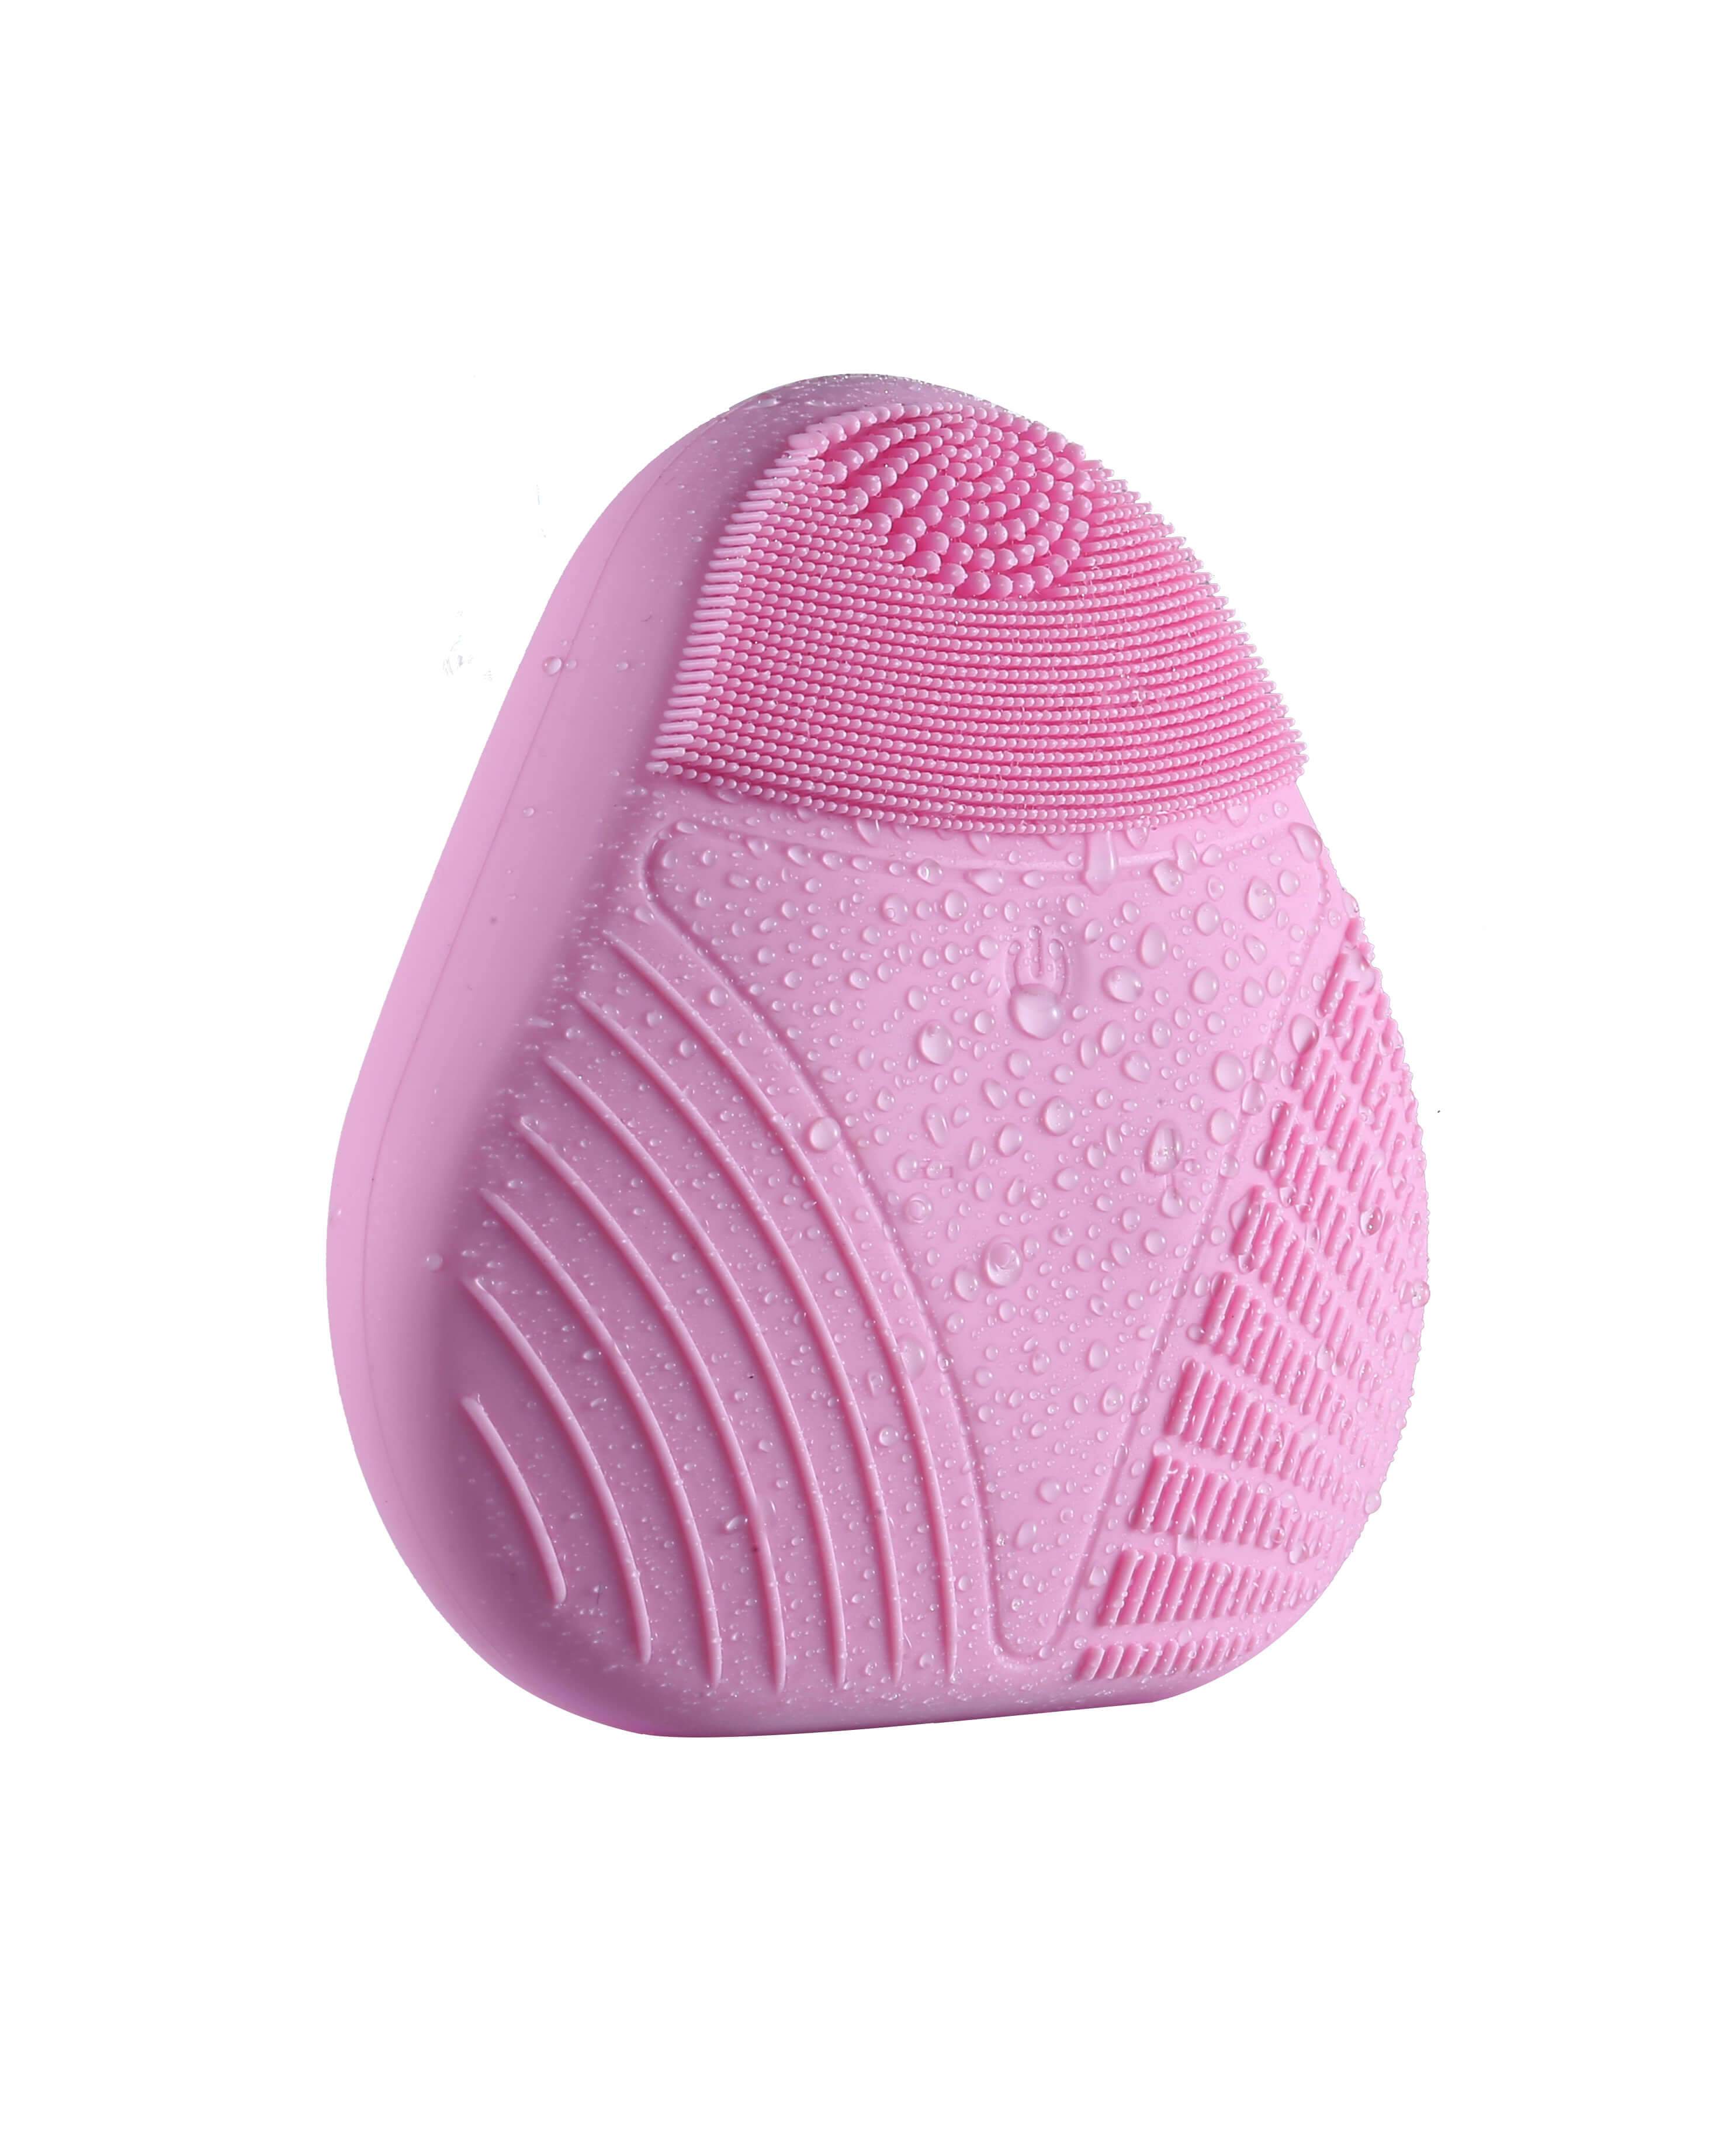 Ultrasonic Silicone Electric Facial Cleanser